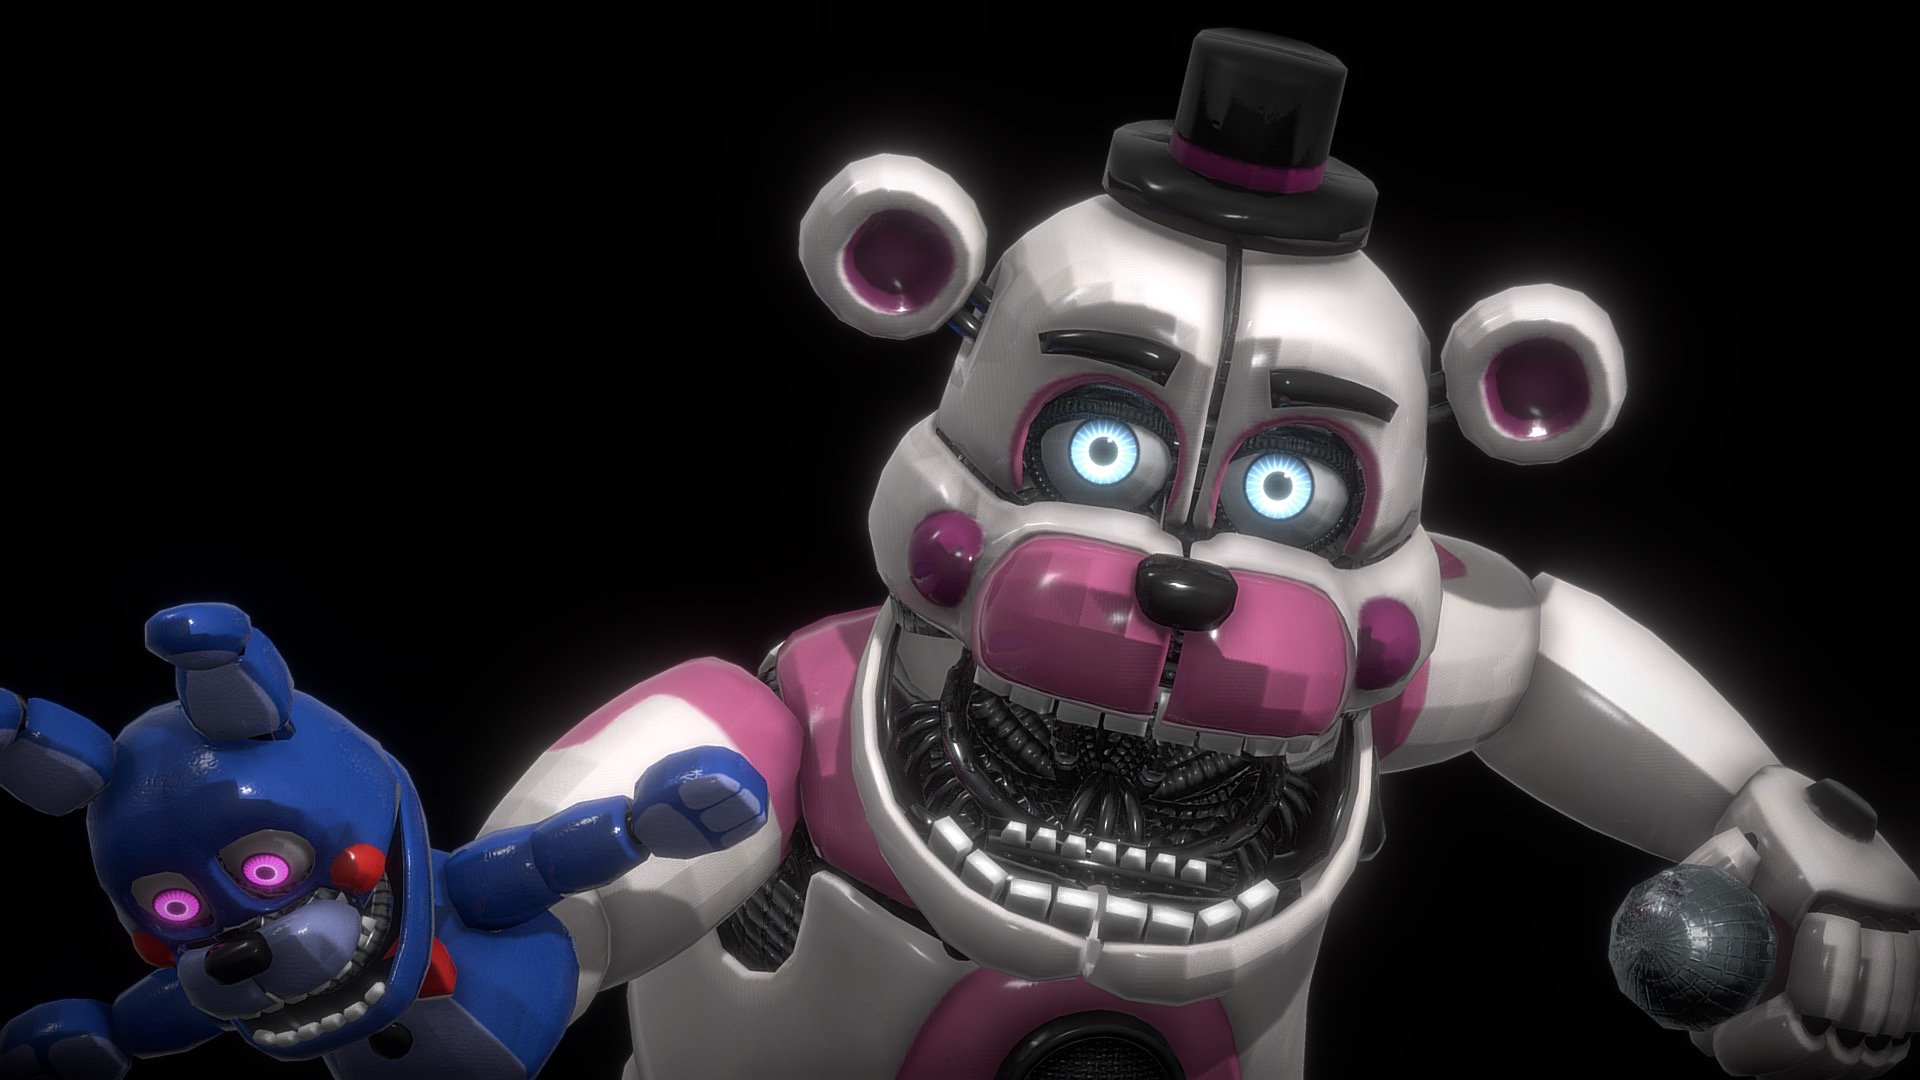 The energetic puppeteer of Circus Baby's Pizza World!

Rented out just for your very special day, Funtime Freddy is sure to bring in the crowds!
━━━━━━━━━━━━━━━━━━━━━━━━━━━━━━━━━━━━━━━━━━

Get FNaF AR: Special Delivery on Google Play and the App Store.




https://play.google.com/store/apps/details?id=com.illumix.fnafar&amp;hl=en_CA&amp;gl=US

https://apps.apple.com/us/app/five-nights-at-freddys-ar/id1473886685
 - Funtime Freddy - FNaF AR: Special Delivery - Download Free 3D model by Priorities 3d model